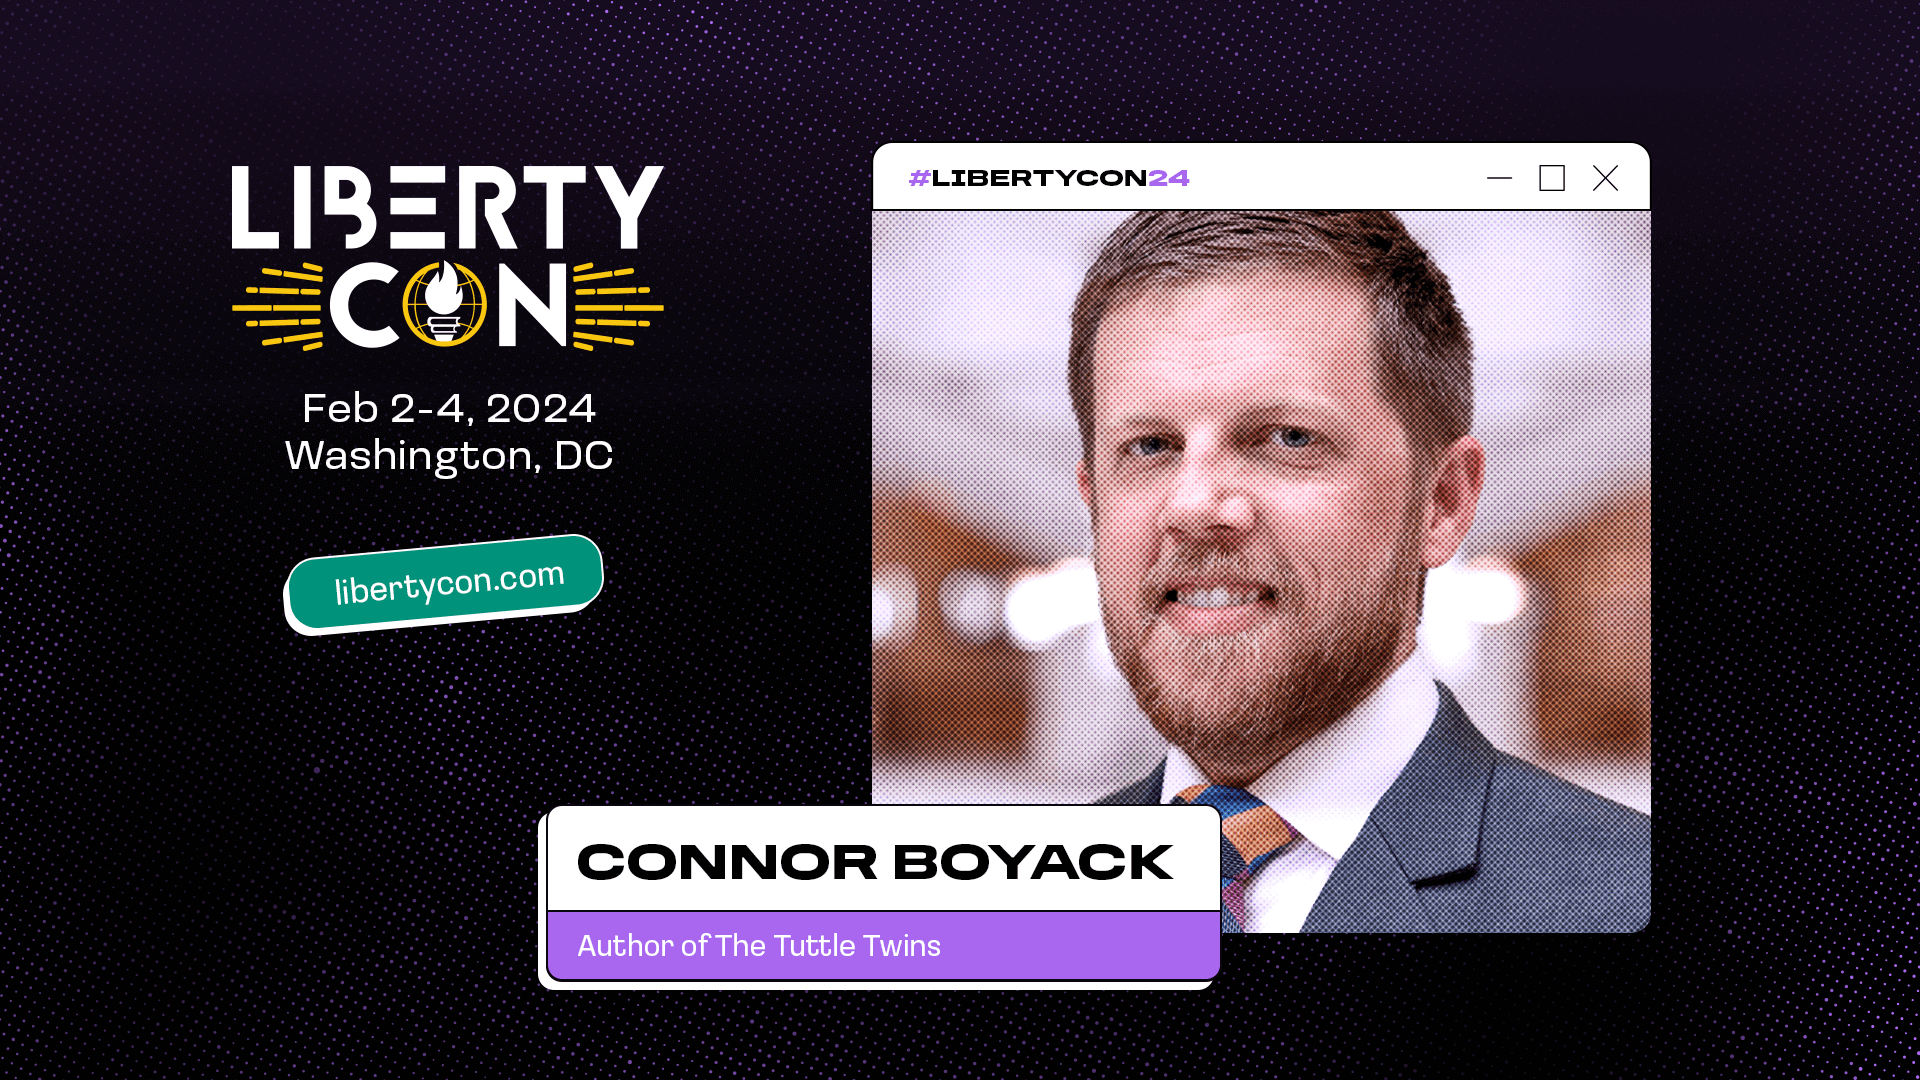 Students For Liberty is announcing two new speakers for LibertyCon International 2024: Connor Boyack and Jaiden Rodriguez